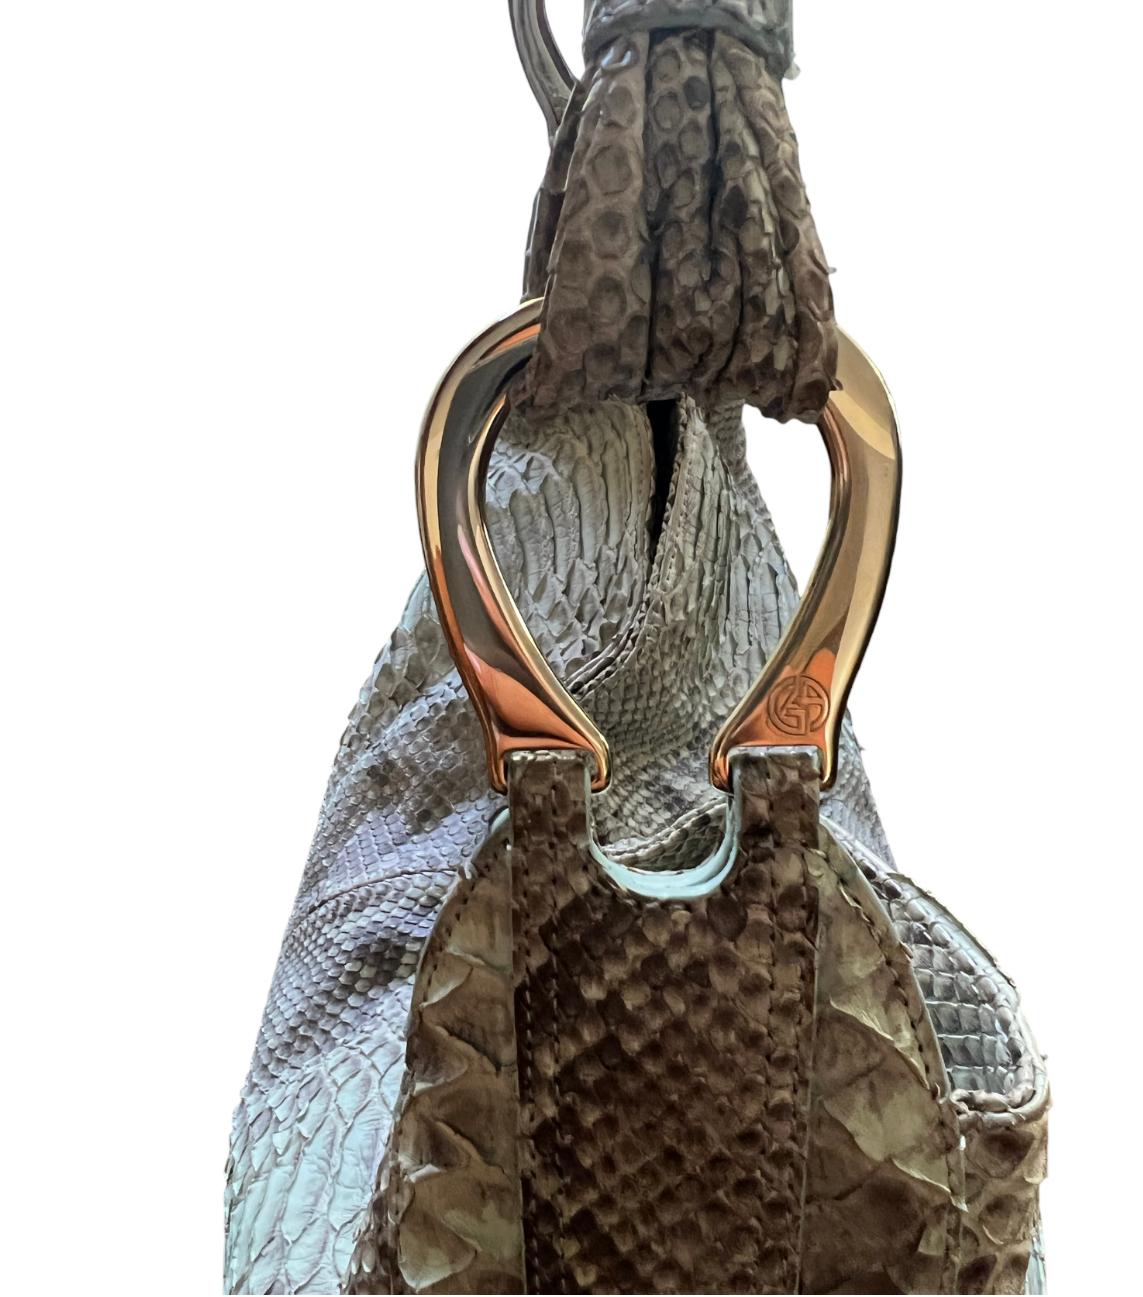 Giorgio Armani Animal Skin Shoulder Bag  In Excellent Condition For Sale In Beverly Hills, CA